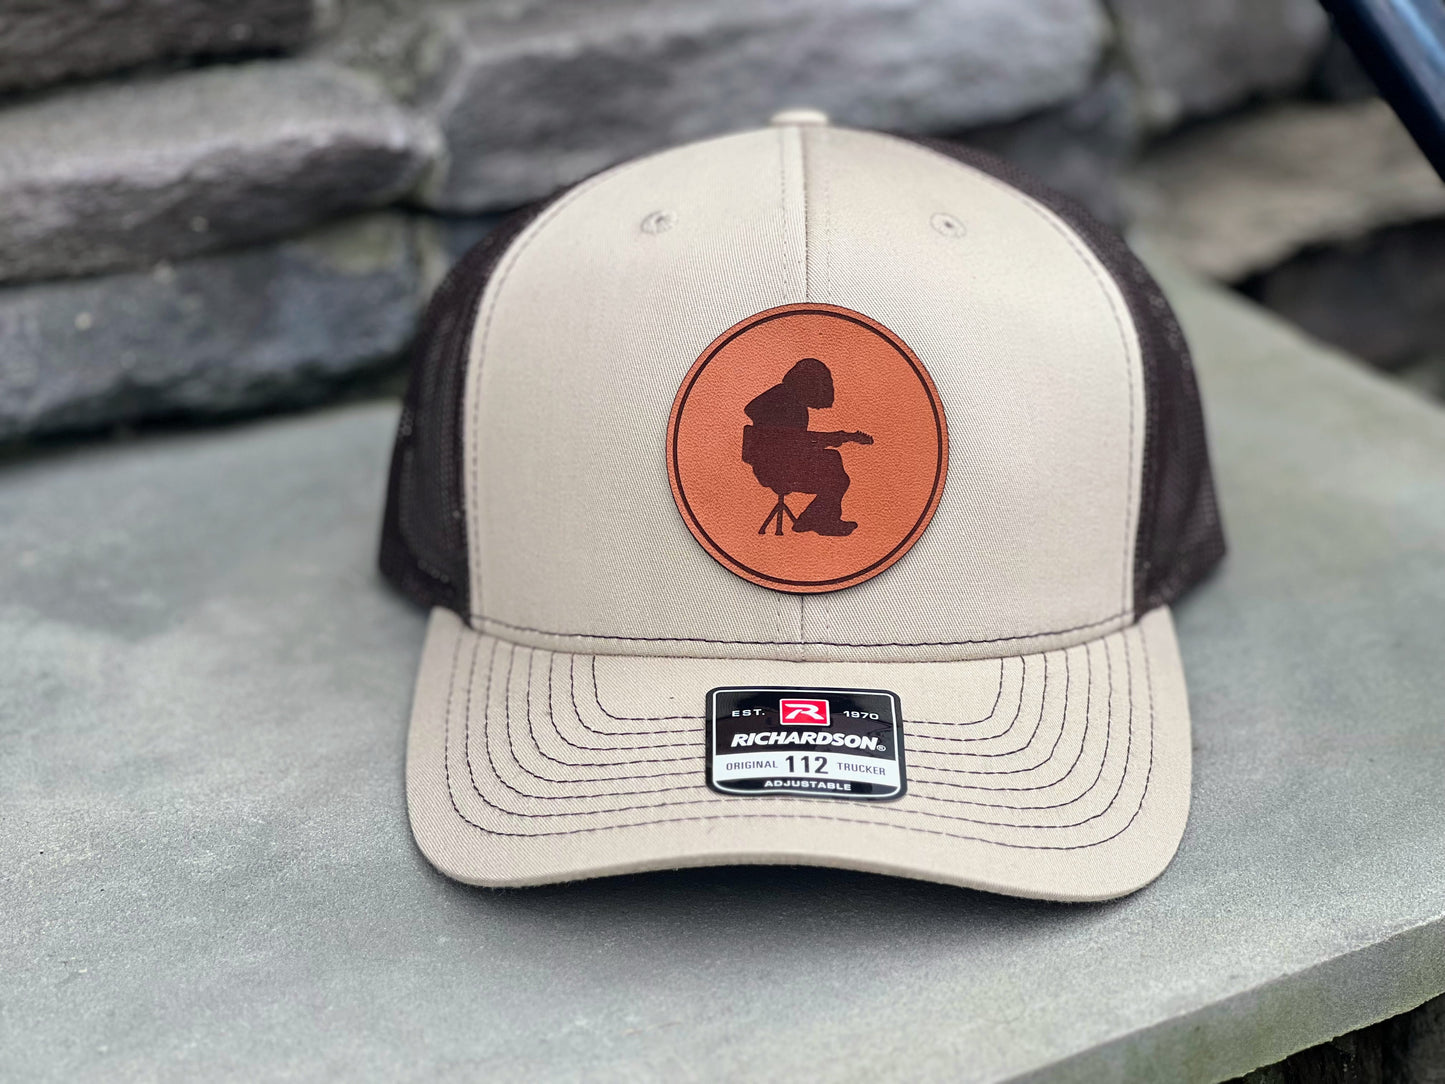 Widespread Panic "Mikey" Circle Leather Patch Hat